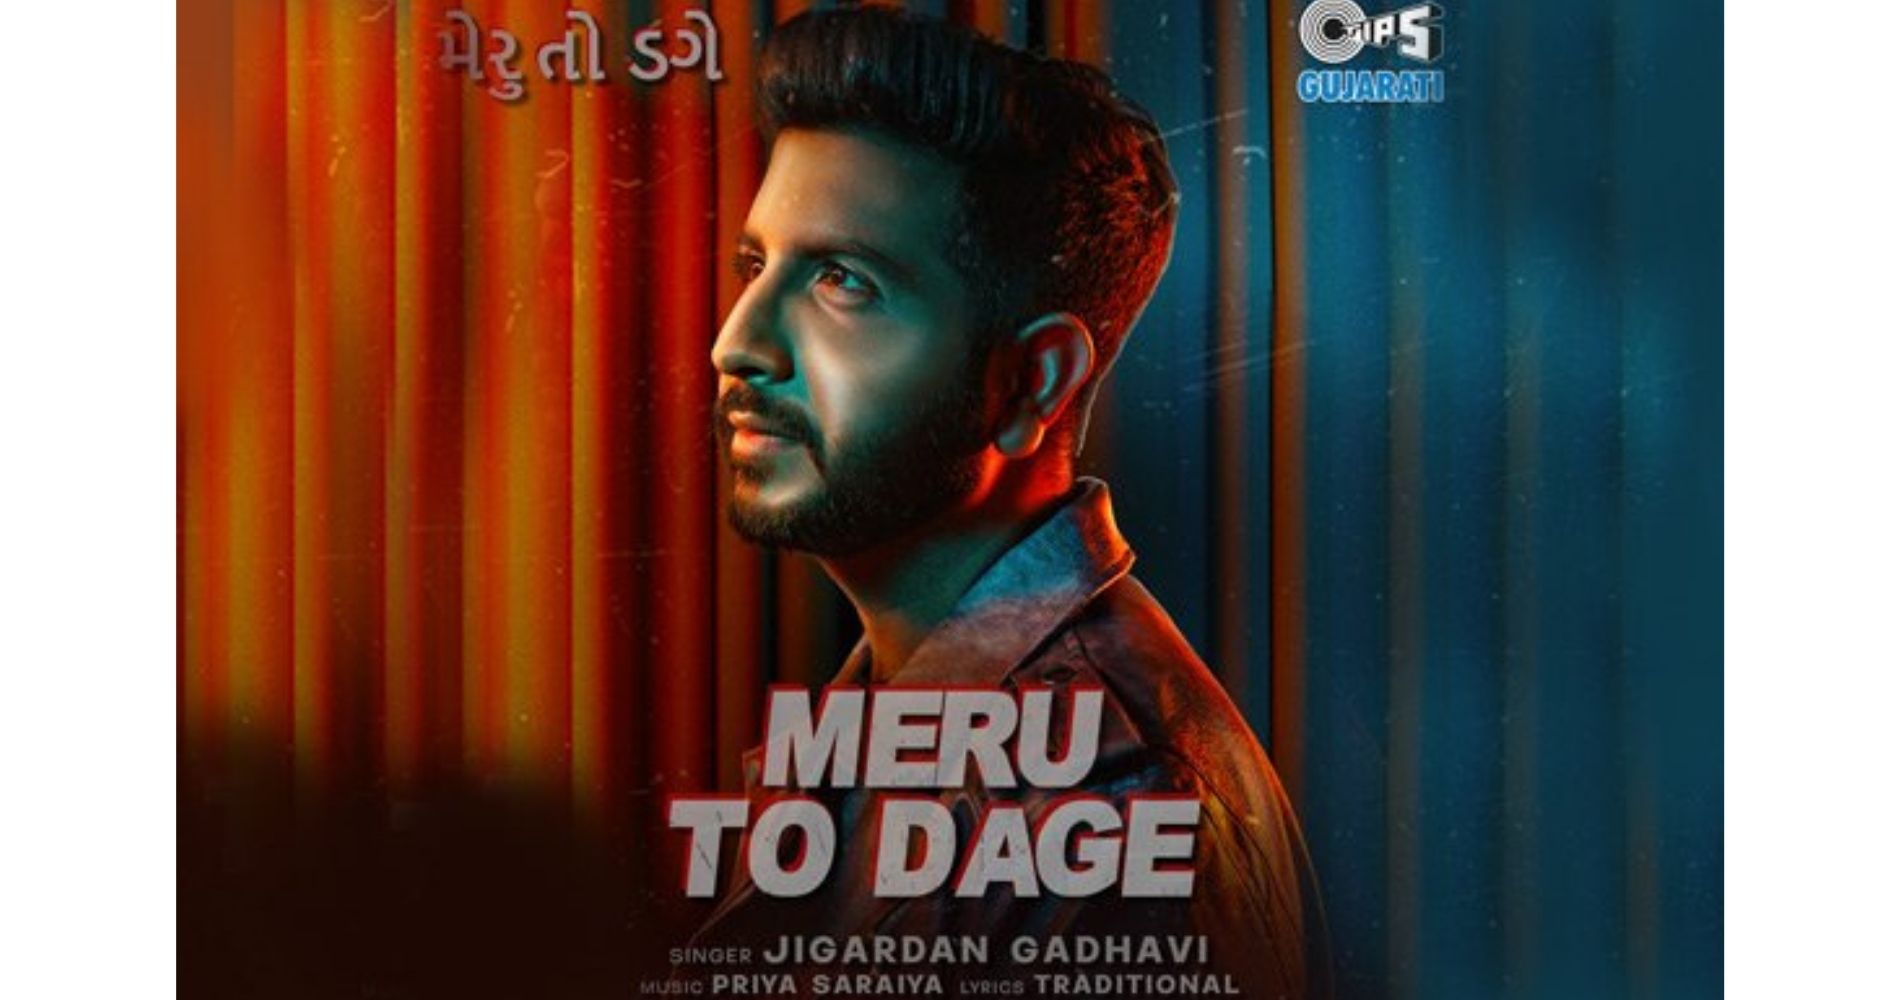 Tips music launches new Gujarati song  “Meru to Dage” sung